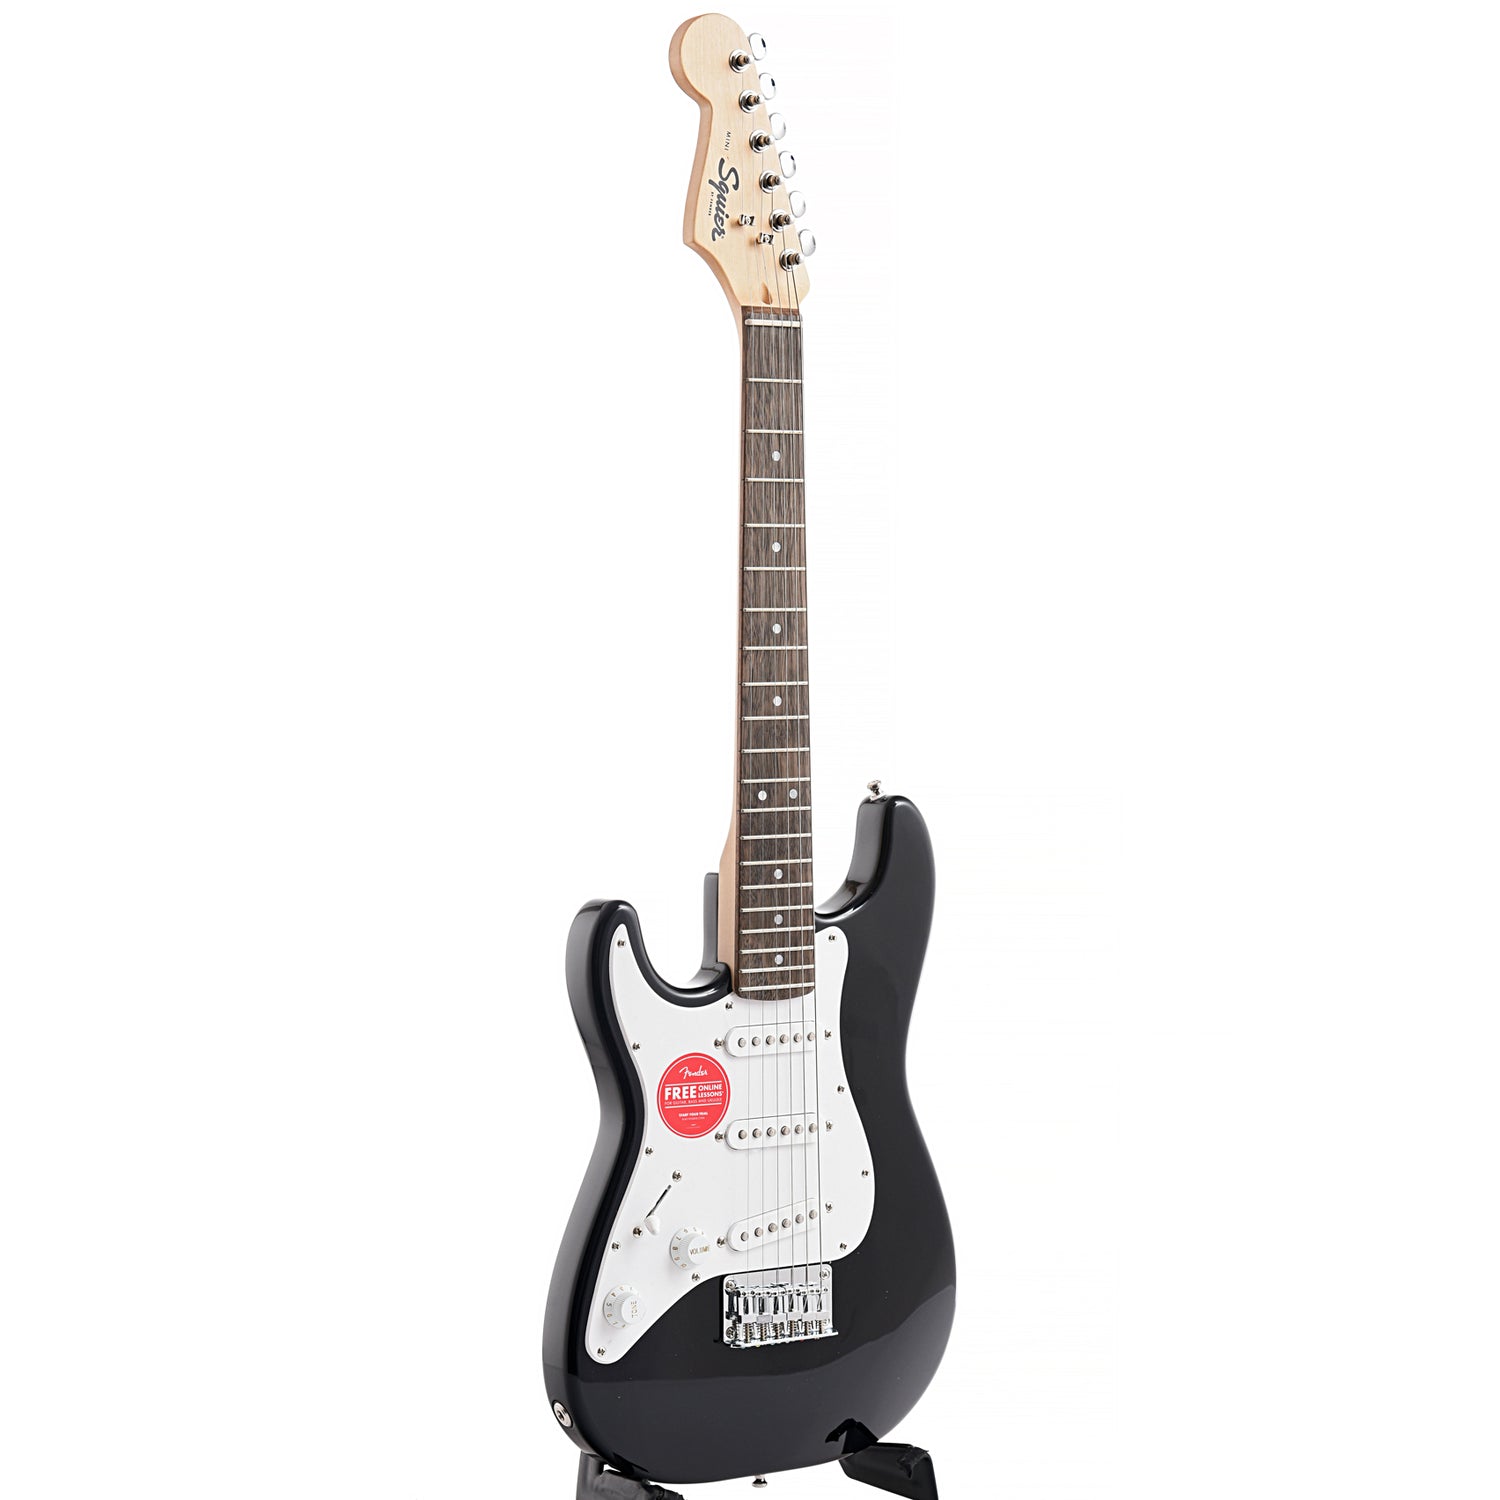 Image 2 of Squier Mini Stratocaster, Left Handed, Black - SKU# SQM2L : Product Type Solid Body Electric Guitars : Elderly Instruments